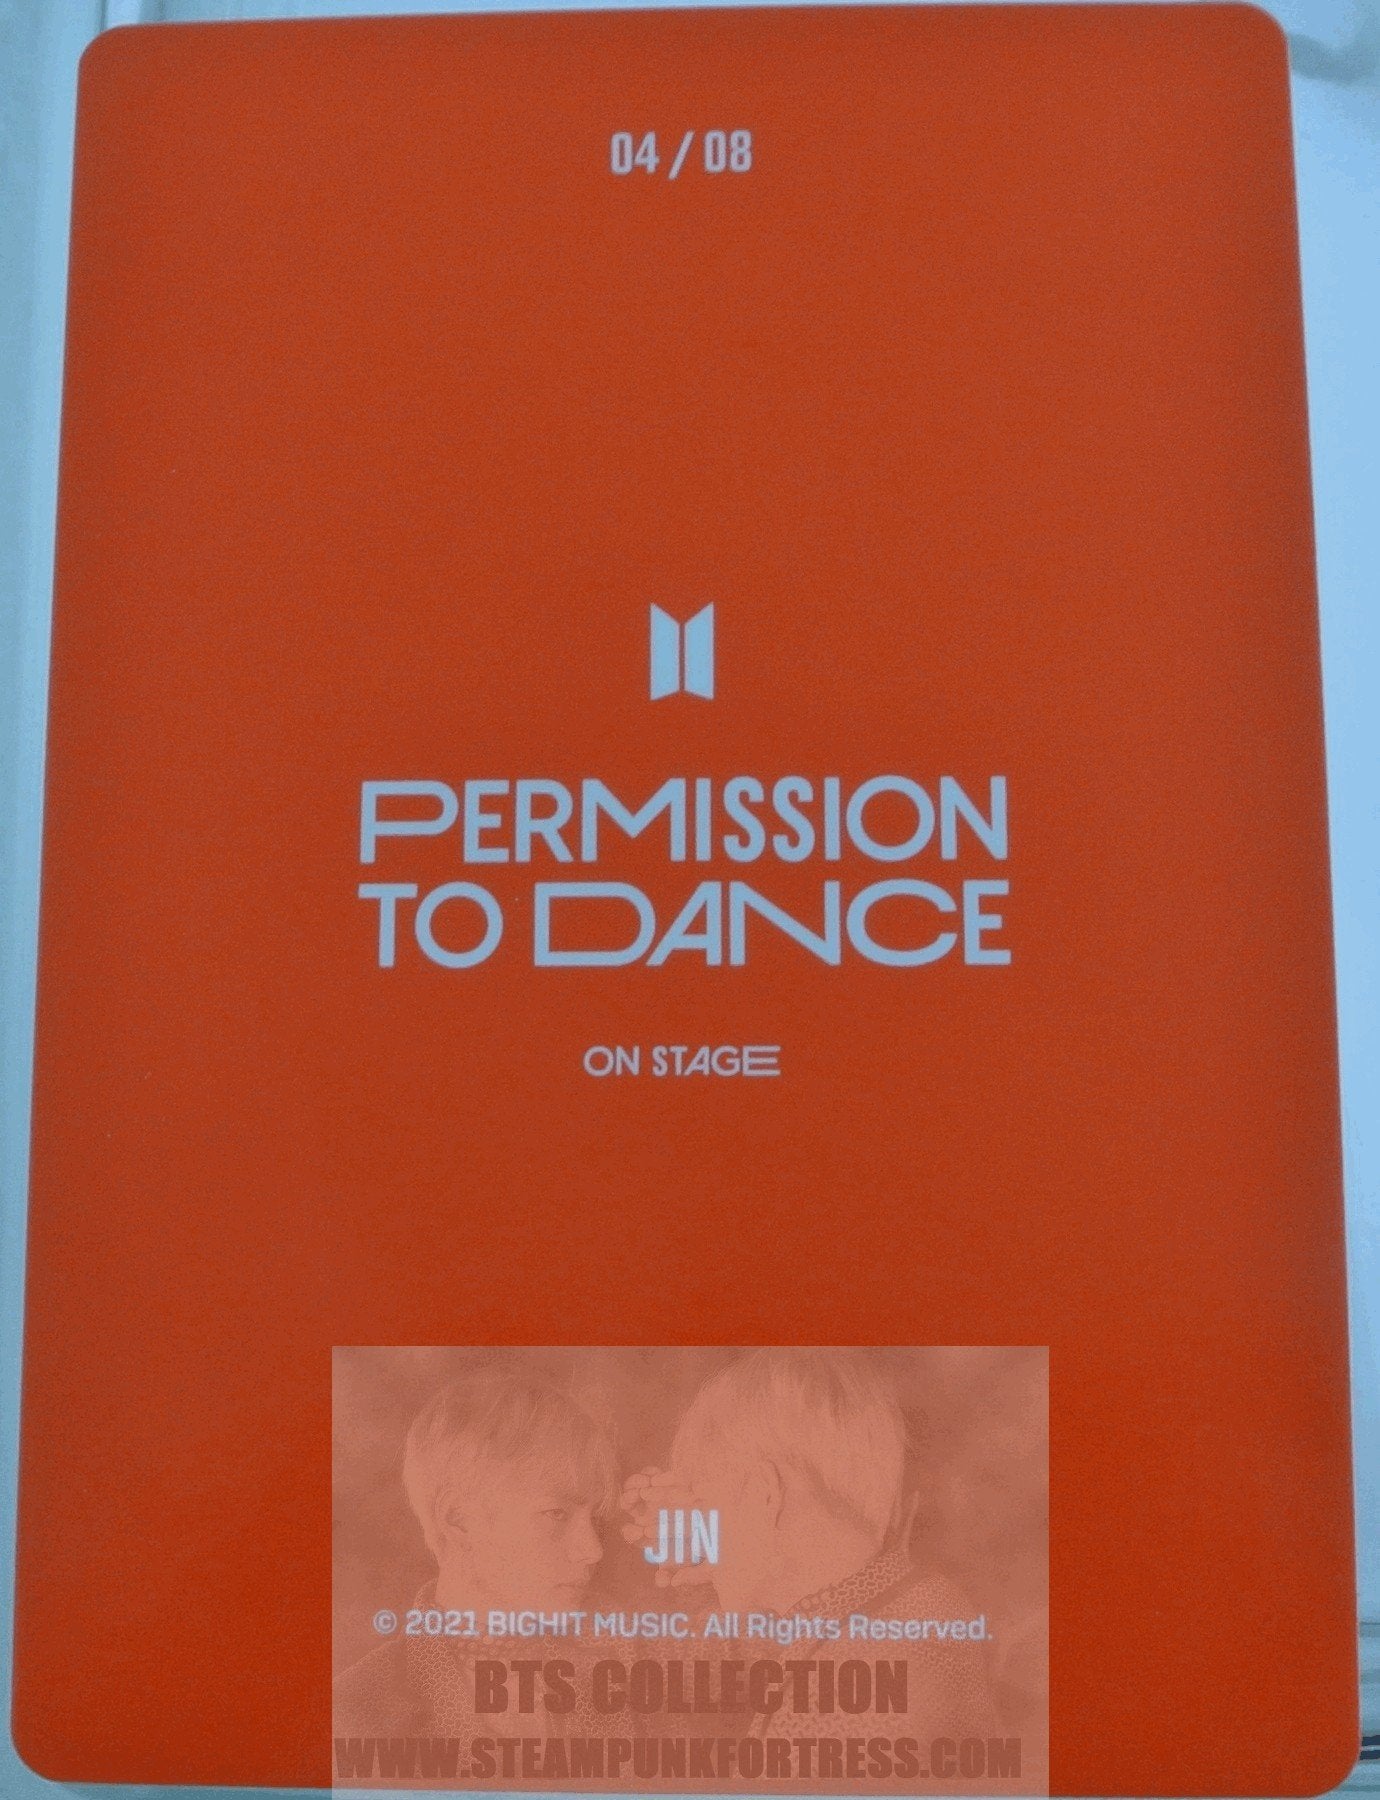 BTS JIN KIM SEOKJIN SEOK-JIN 2021 PERMISSION TO DANCE ON STAGE PTD #4 OF 8 PHOTOCARD PHOTO CARD NEW OFFICIAL MERCHANDISE